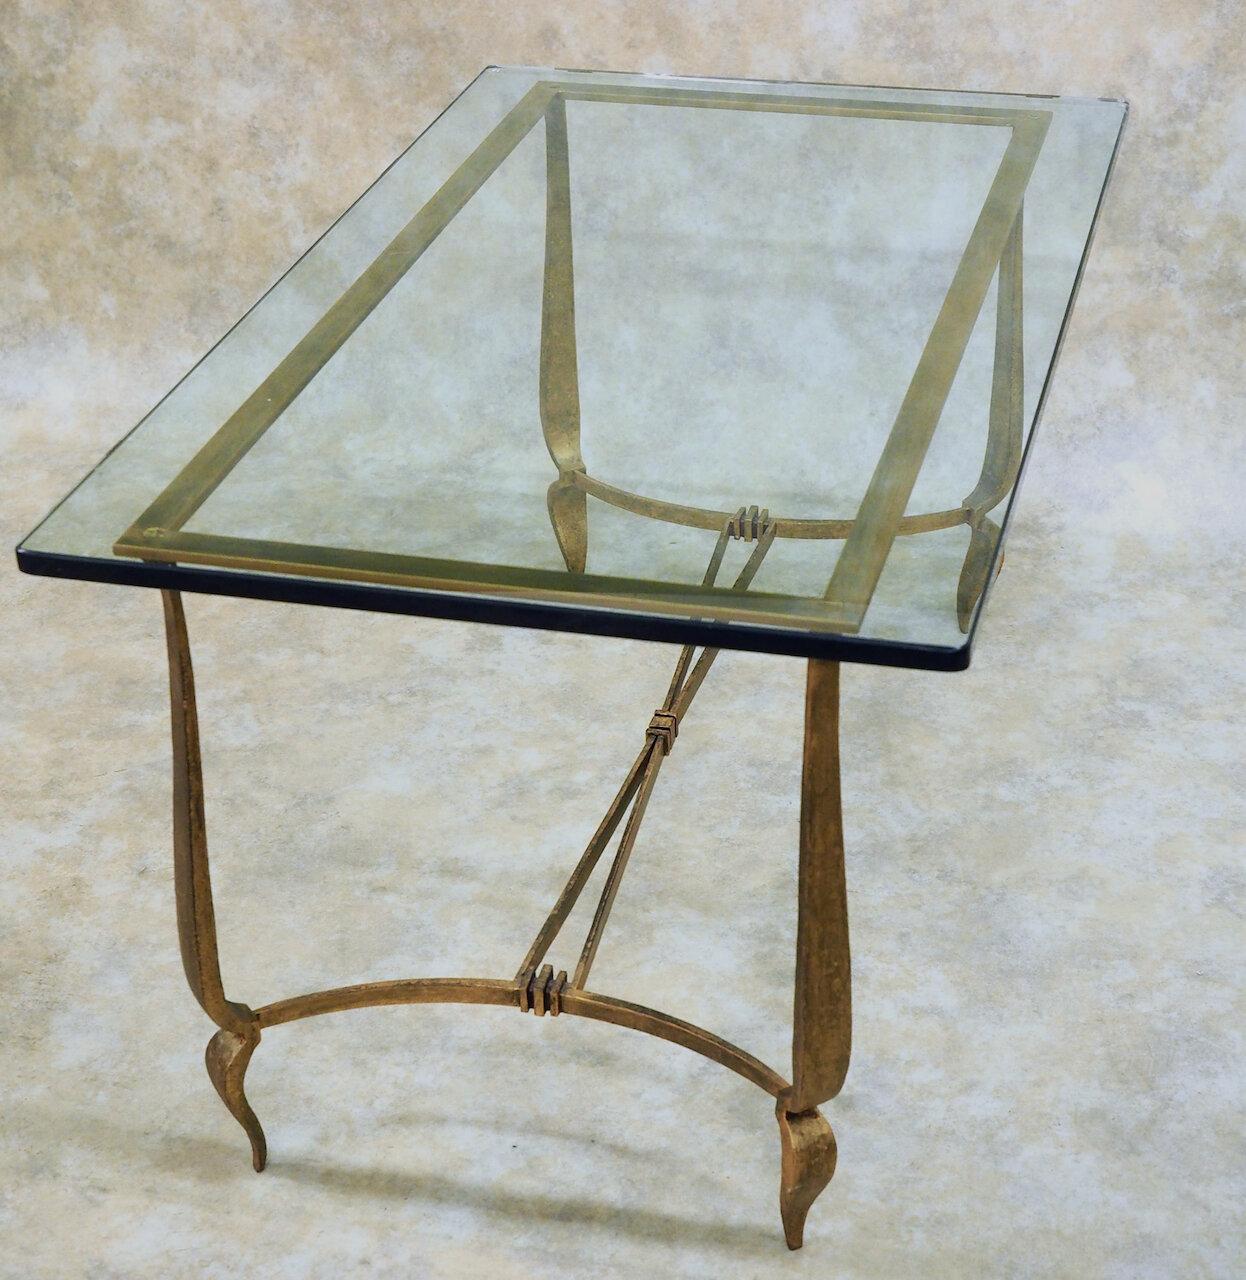 Mid-20th Century Rene Prou Gilt Iron Coffee Table For Sale